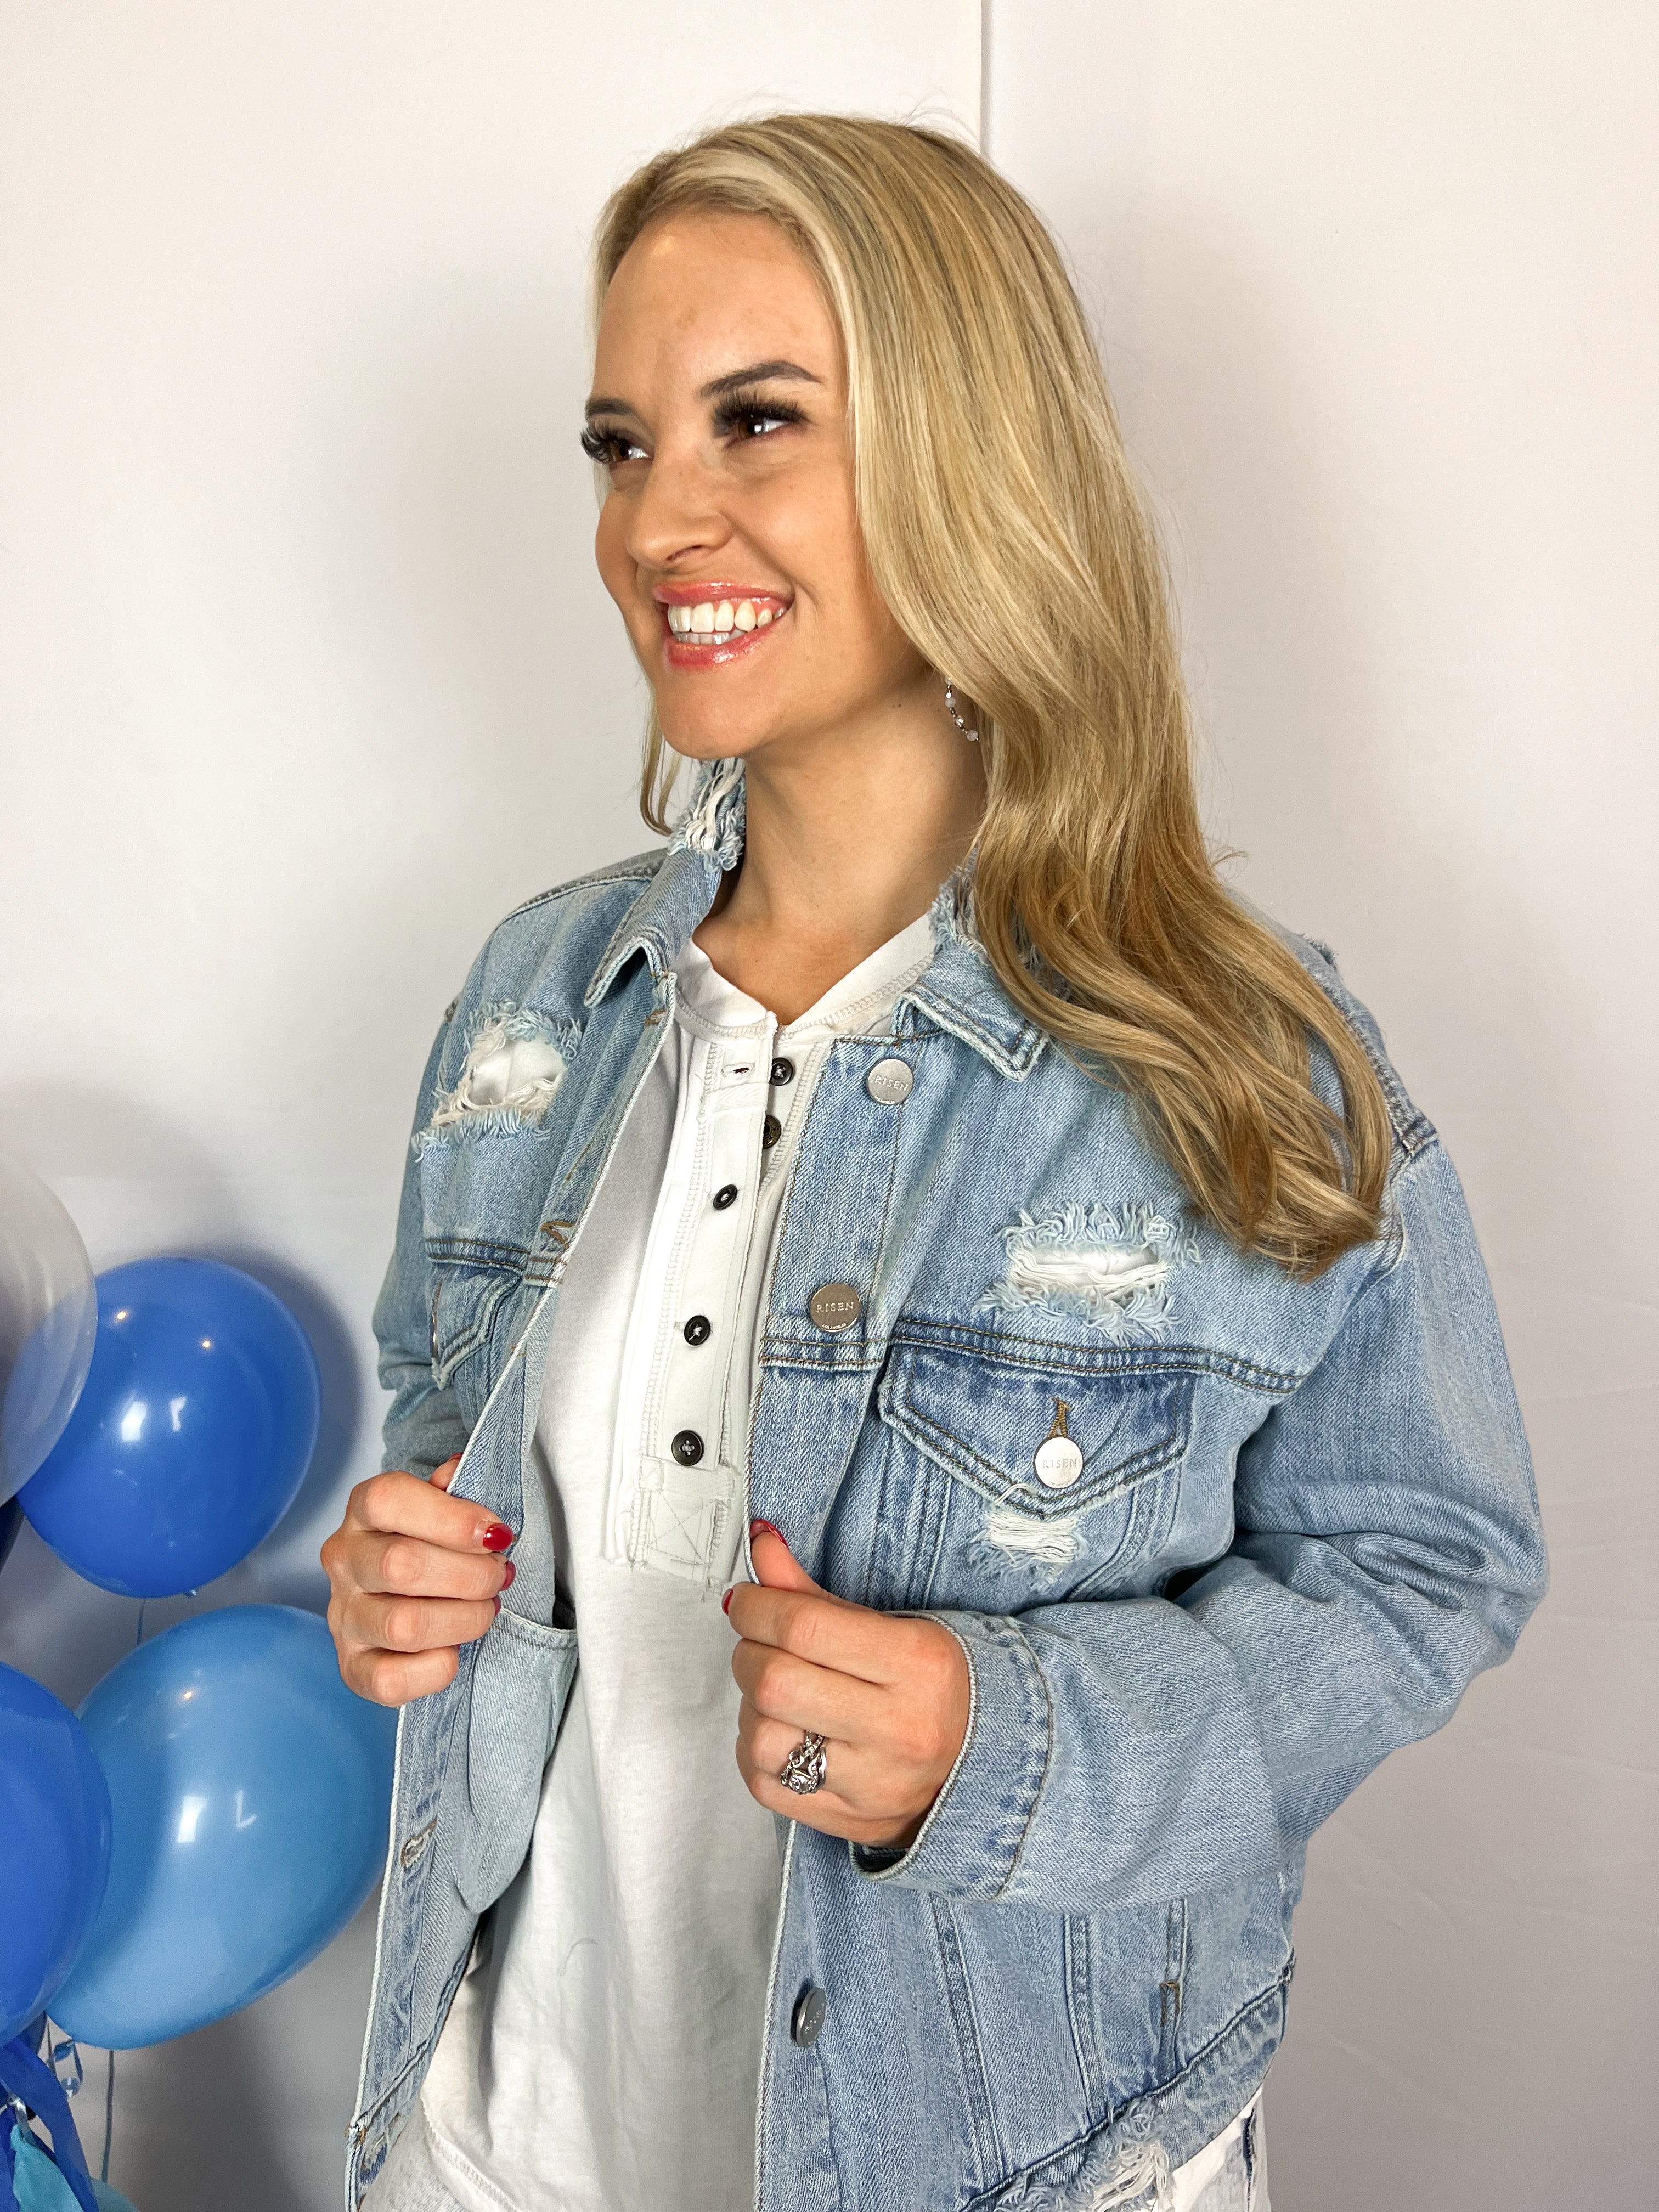 Keeping It Cool Risen Denim Jacket-170 Jackets/Outerwear-The Lovely Closet-The Lovely Closet, Women's Fashion Boutique in Alexandria, KY